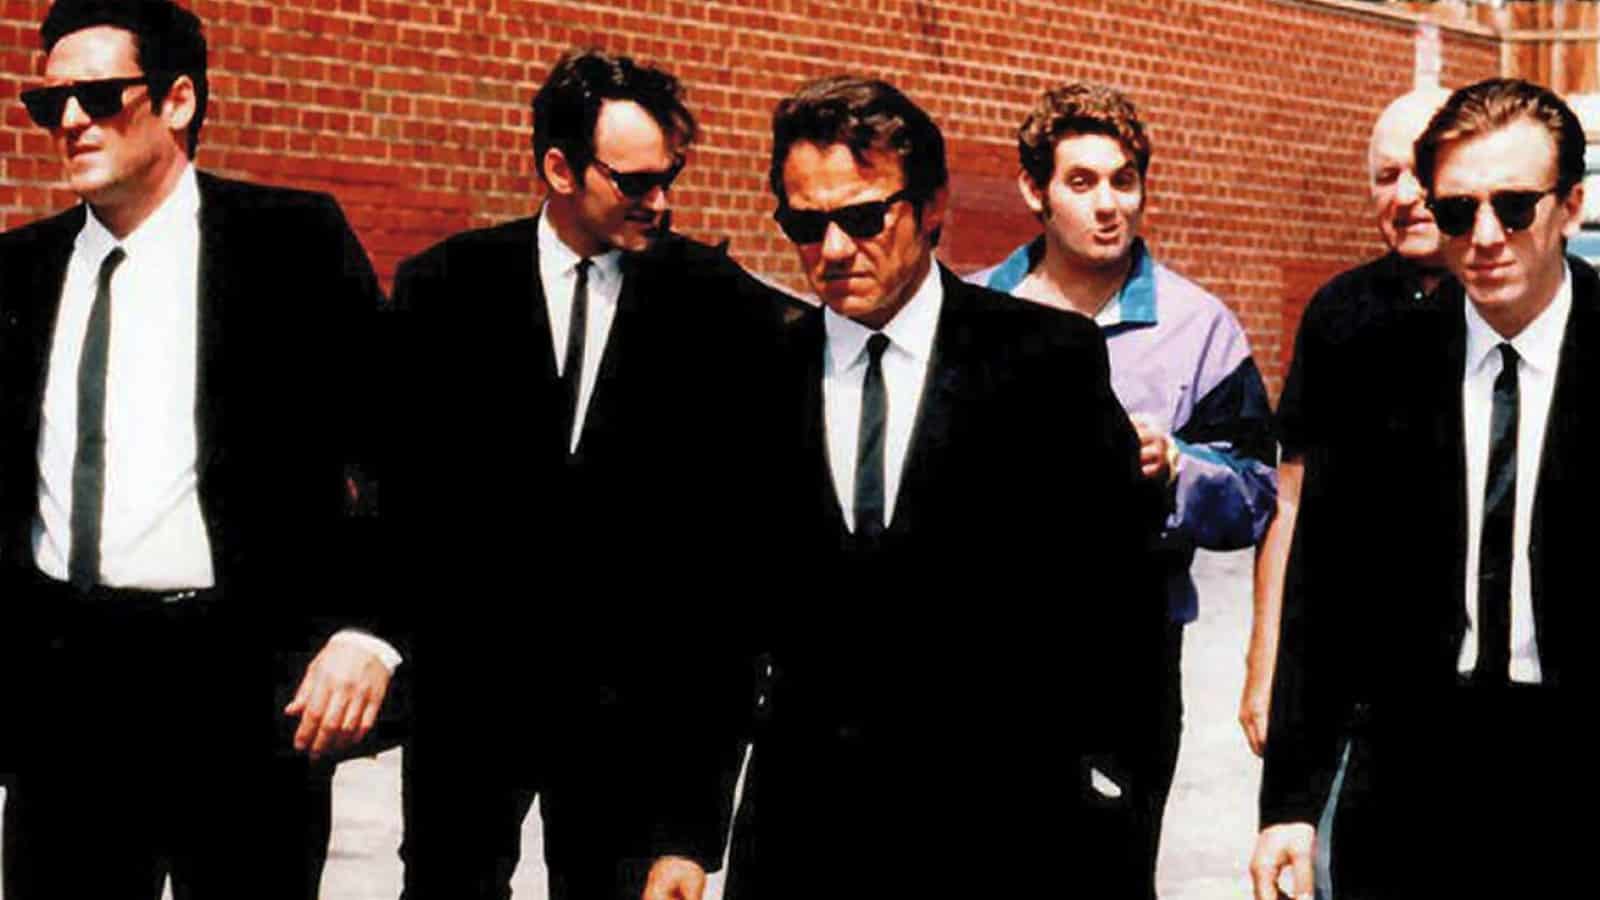 Quentin Tarantino and the cast of Reservoir Dogs in their suits, a key inspiration for the Gentleminions trend